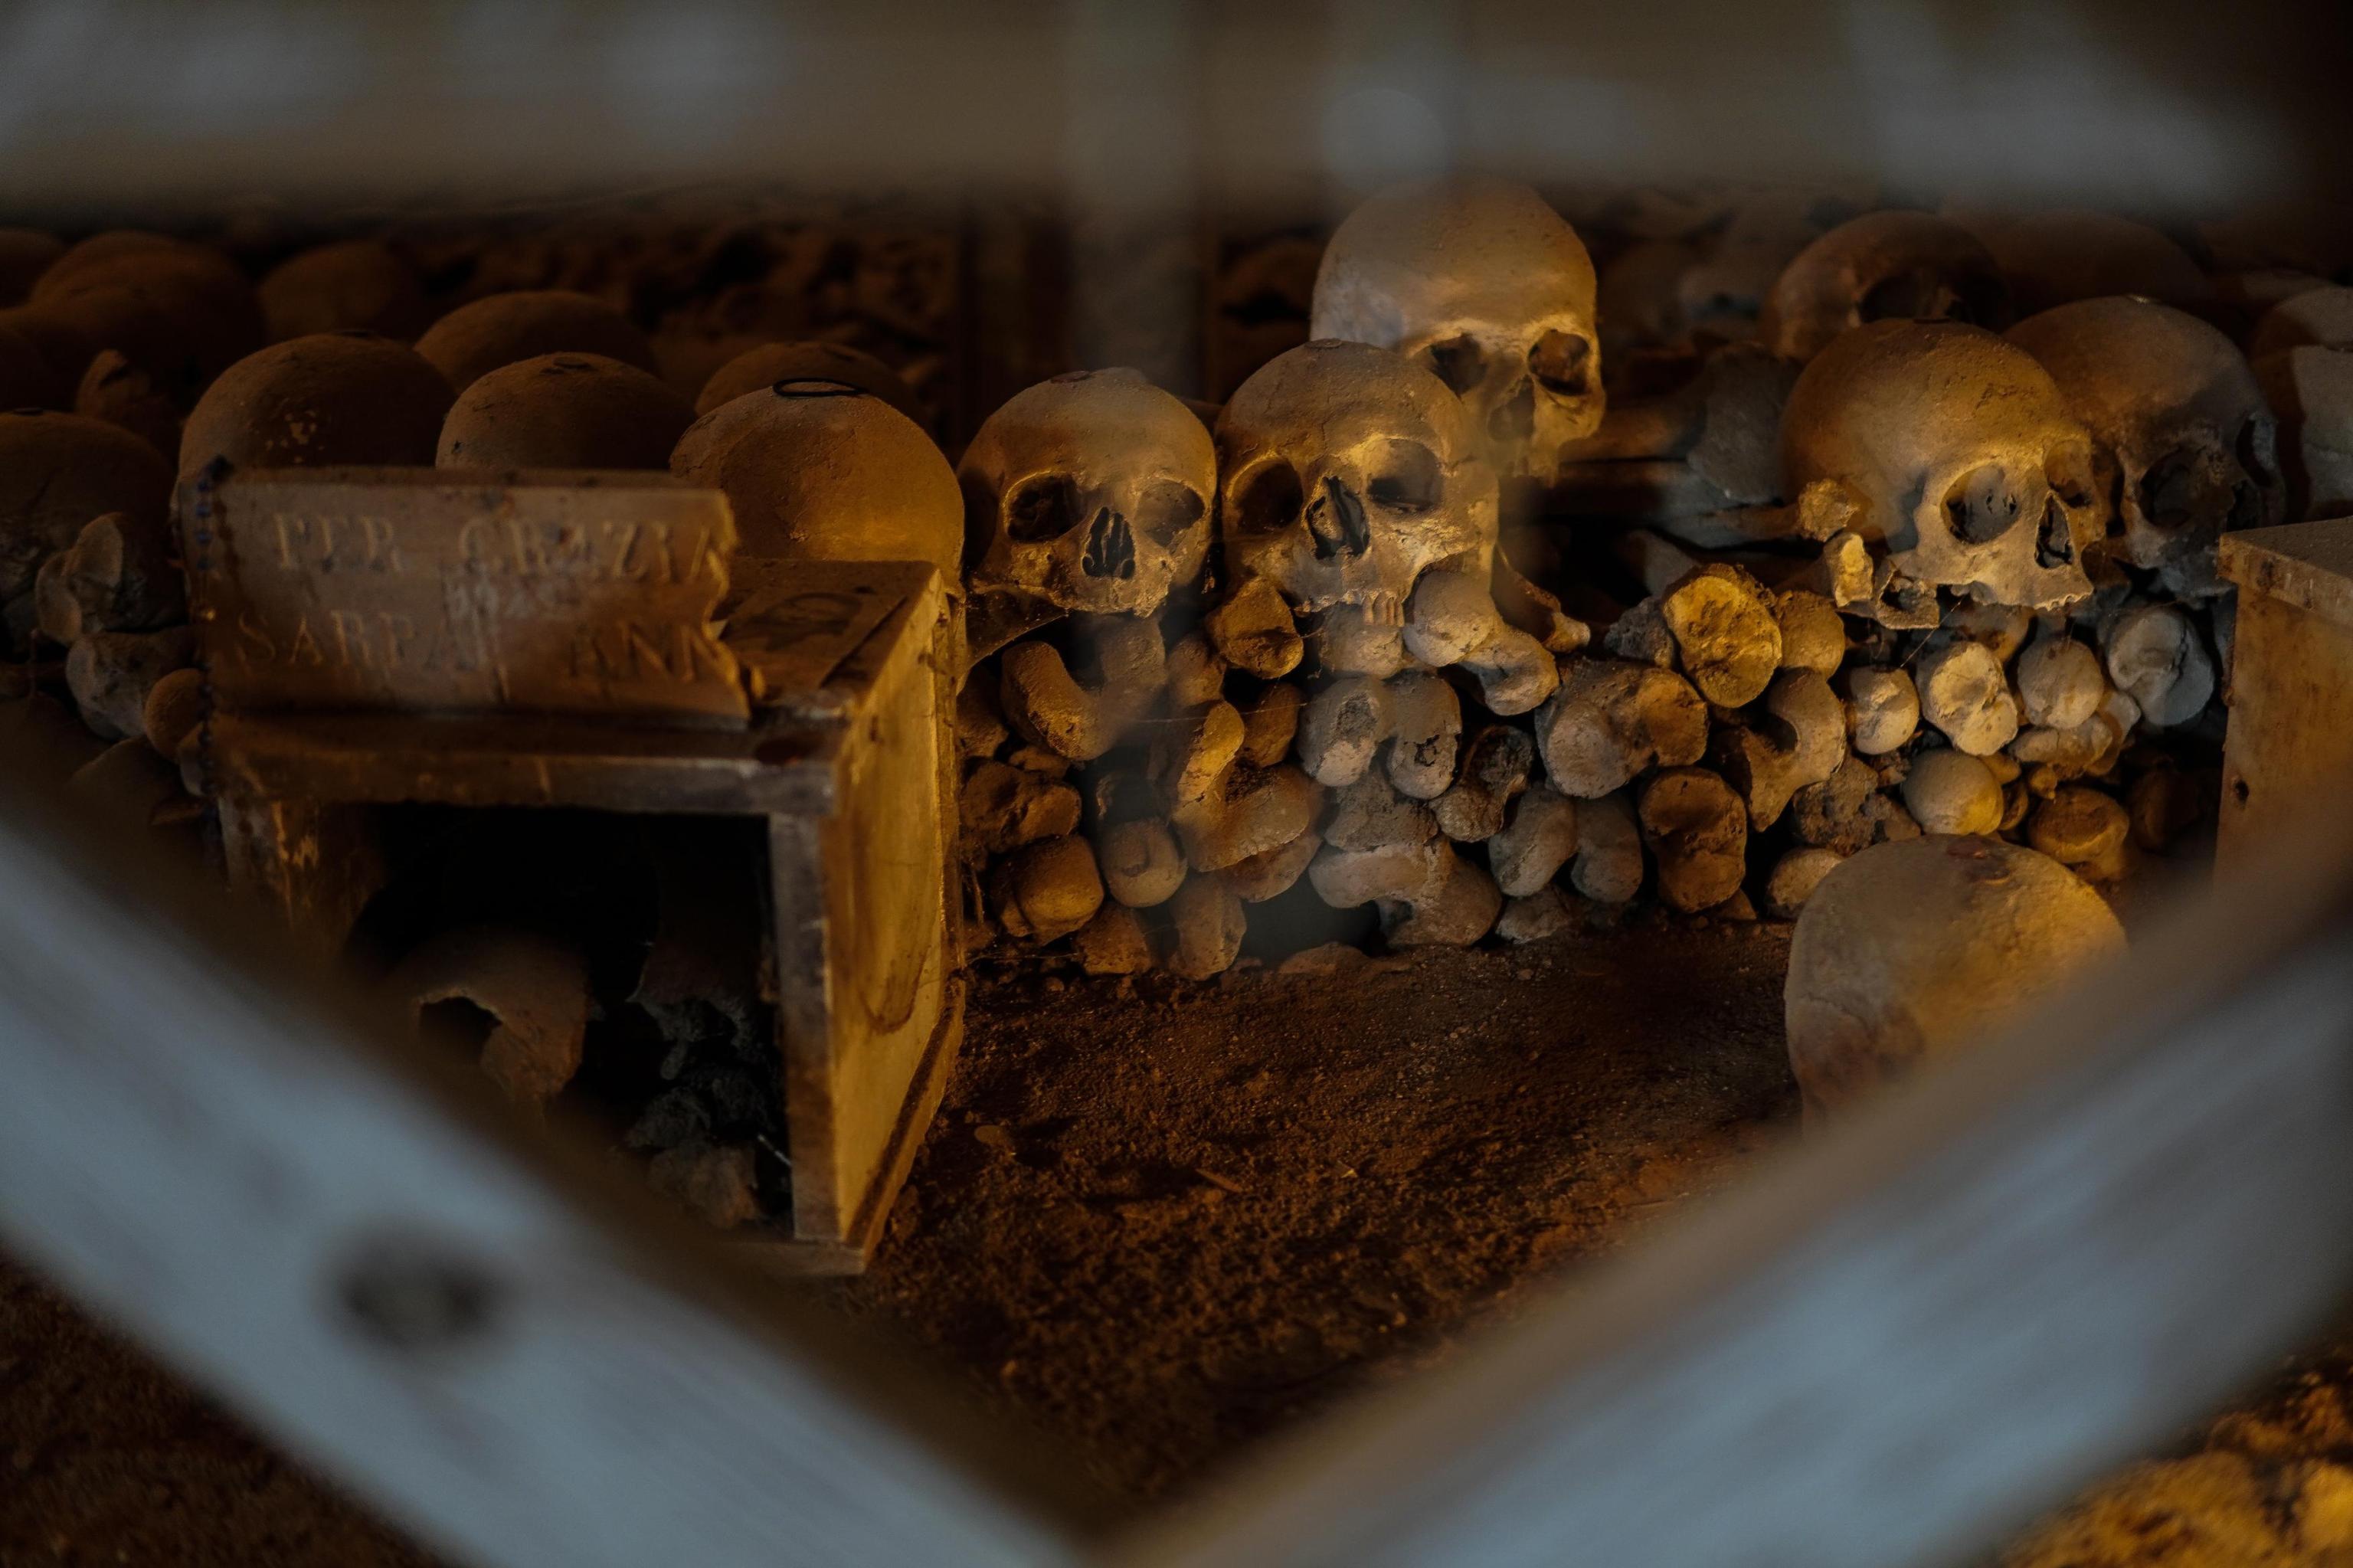 epa07966669 Skulls and bones inside the Fontanelle cemetery in Naples, Italy, 02 November 2019. The Fontanelle cemetery is the epicenter of what is known as 'The Neapolitan Cult of the Dead' or 'The Neapolitan Skull Cult'. It is a vast underground ossuary located in a cave in the tuff hillside at the heart of the Sanita' quarter, once used to bury the corpses of people for whom there was no room in the public graves at the churches within the city. Before it became a place of popular worship and the focal point for various rites, legends and tales of miracles. The anonymous bones are the object of great devotion and have always been referred to by the Neapolitans as the anime 'pezzentelle', or 'little wretches', thus creating a link between the living and the dead. EPA-EFE/CESARE ABBATE